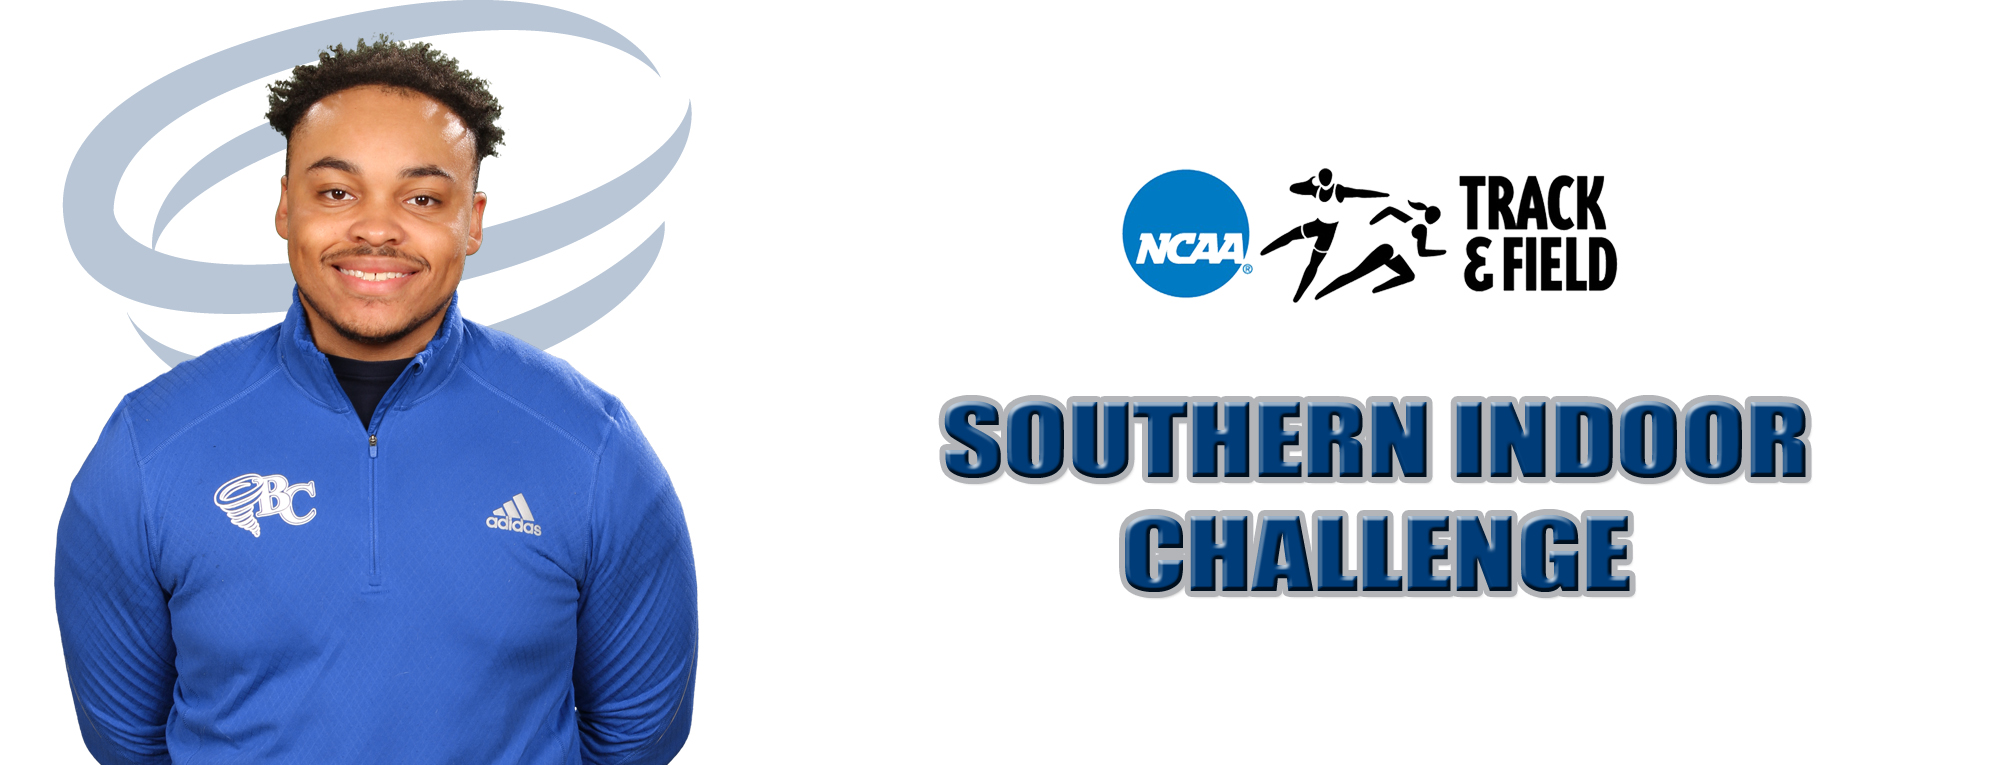 Southern Indoor Challenge Awaits Track & Field